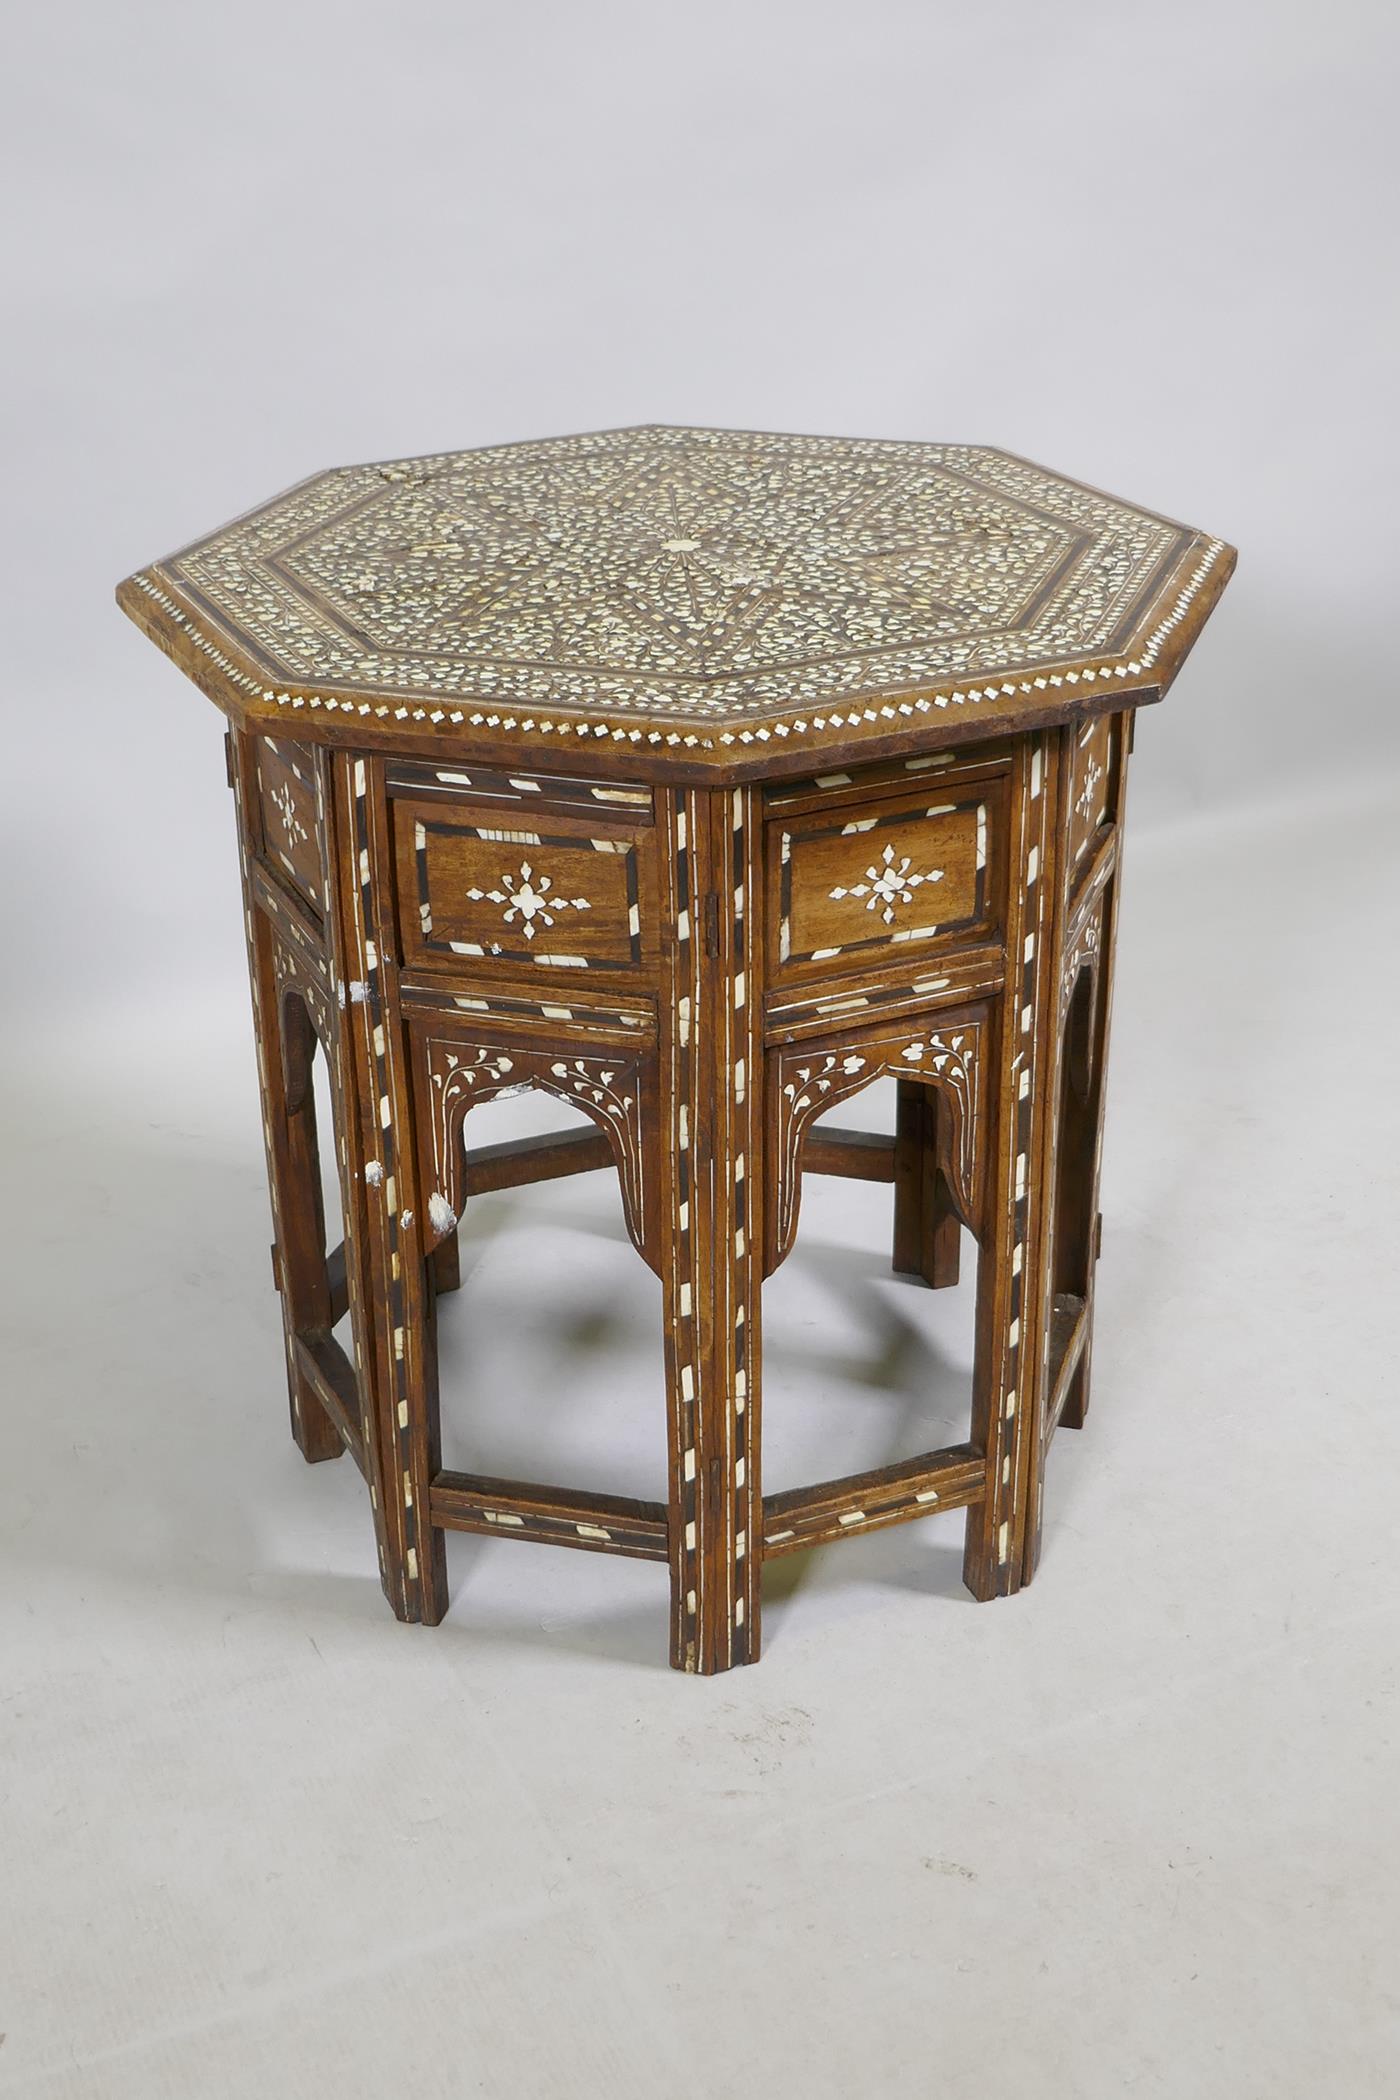 A C19th Anglo Indian bone and ebony inlaid rosewood Hoshiarpur table, AF repairs to inlay, 46 x - Image 4 of 8